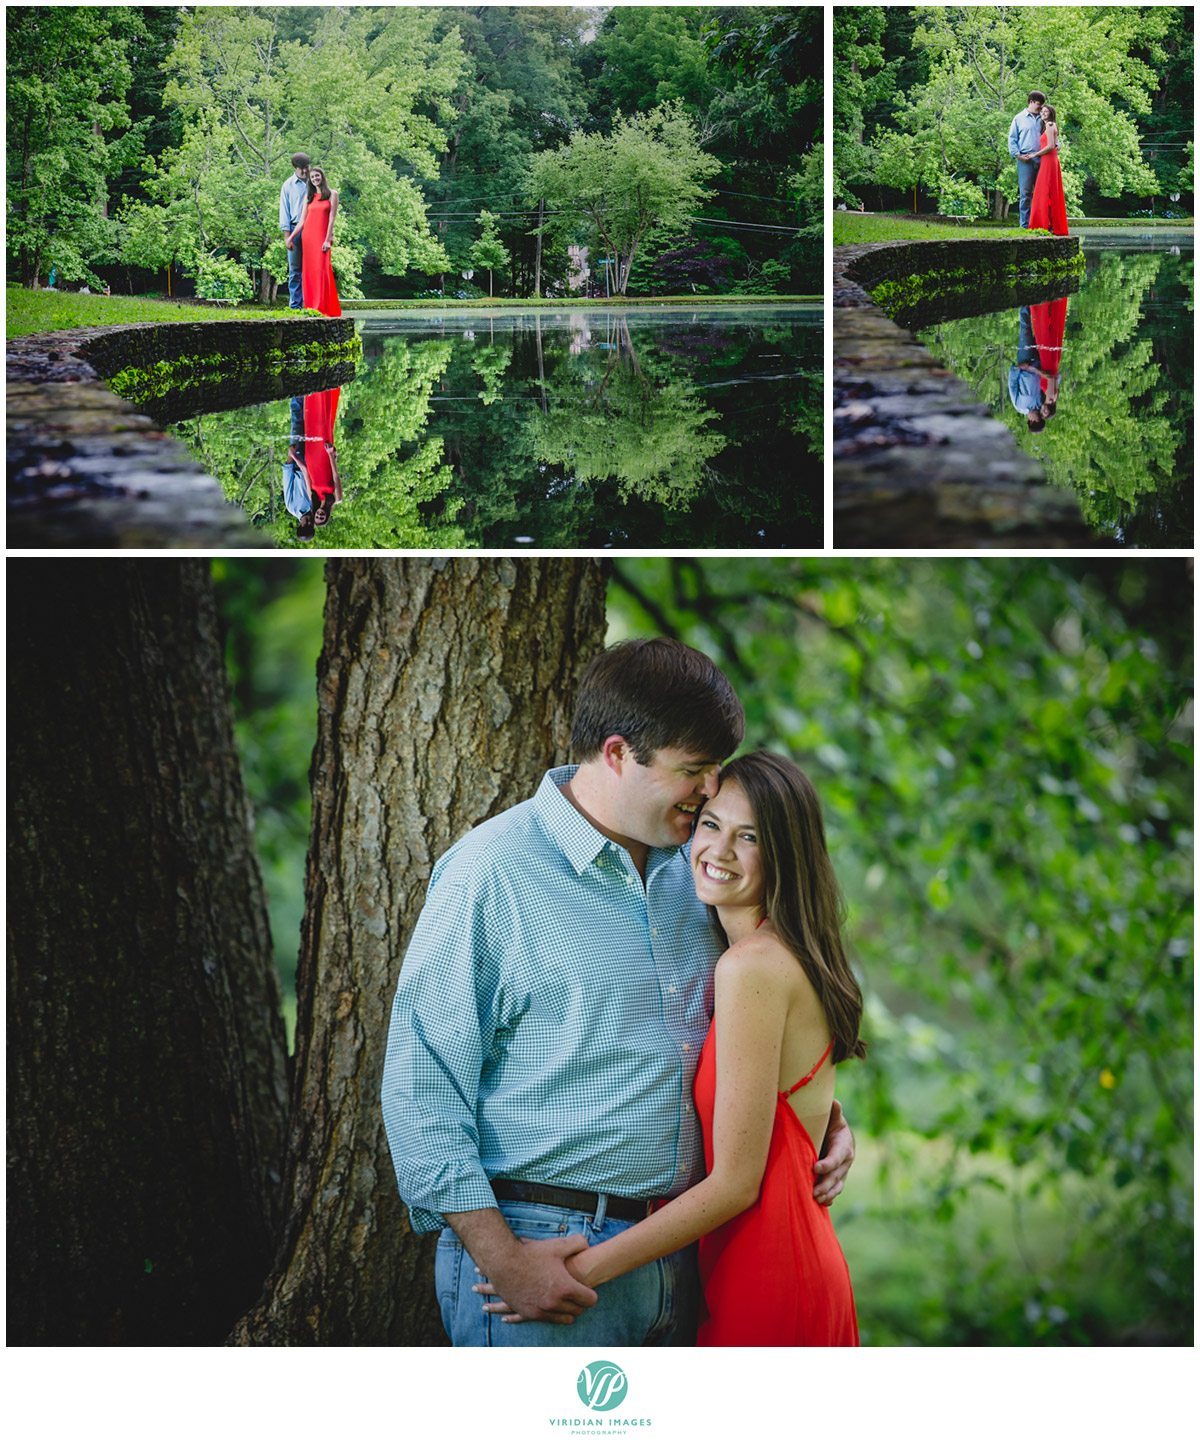 Atlanta-duck-poind-engagement-session-viridian-images-photography-photo-8